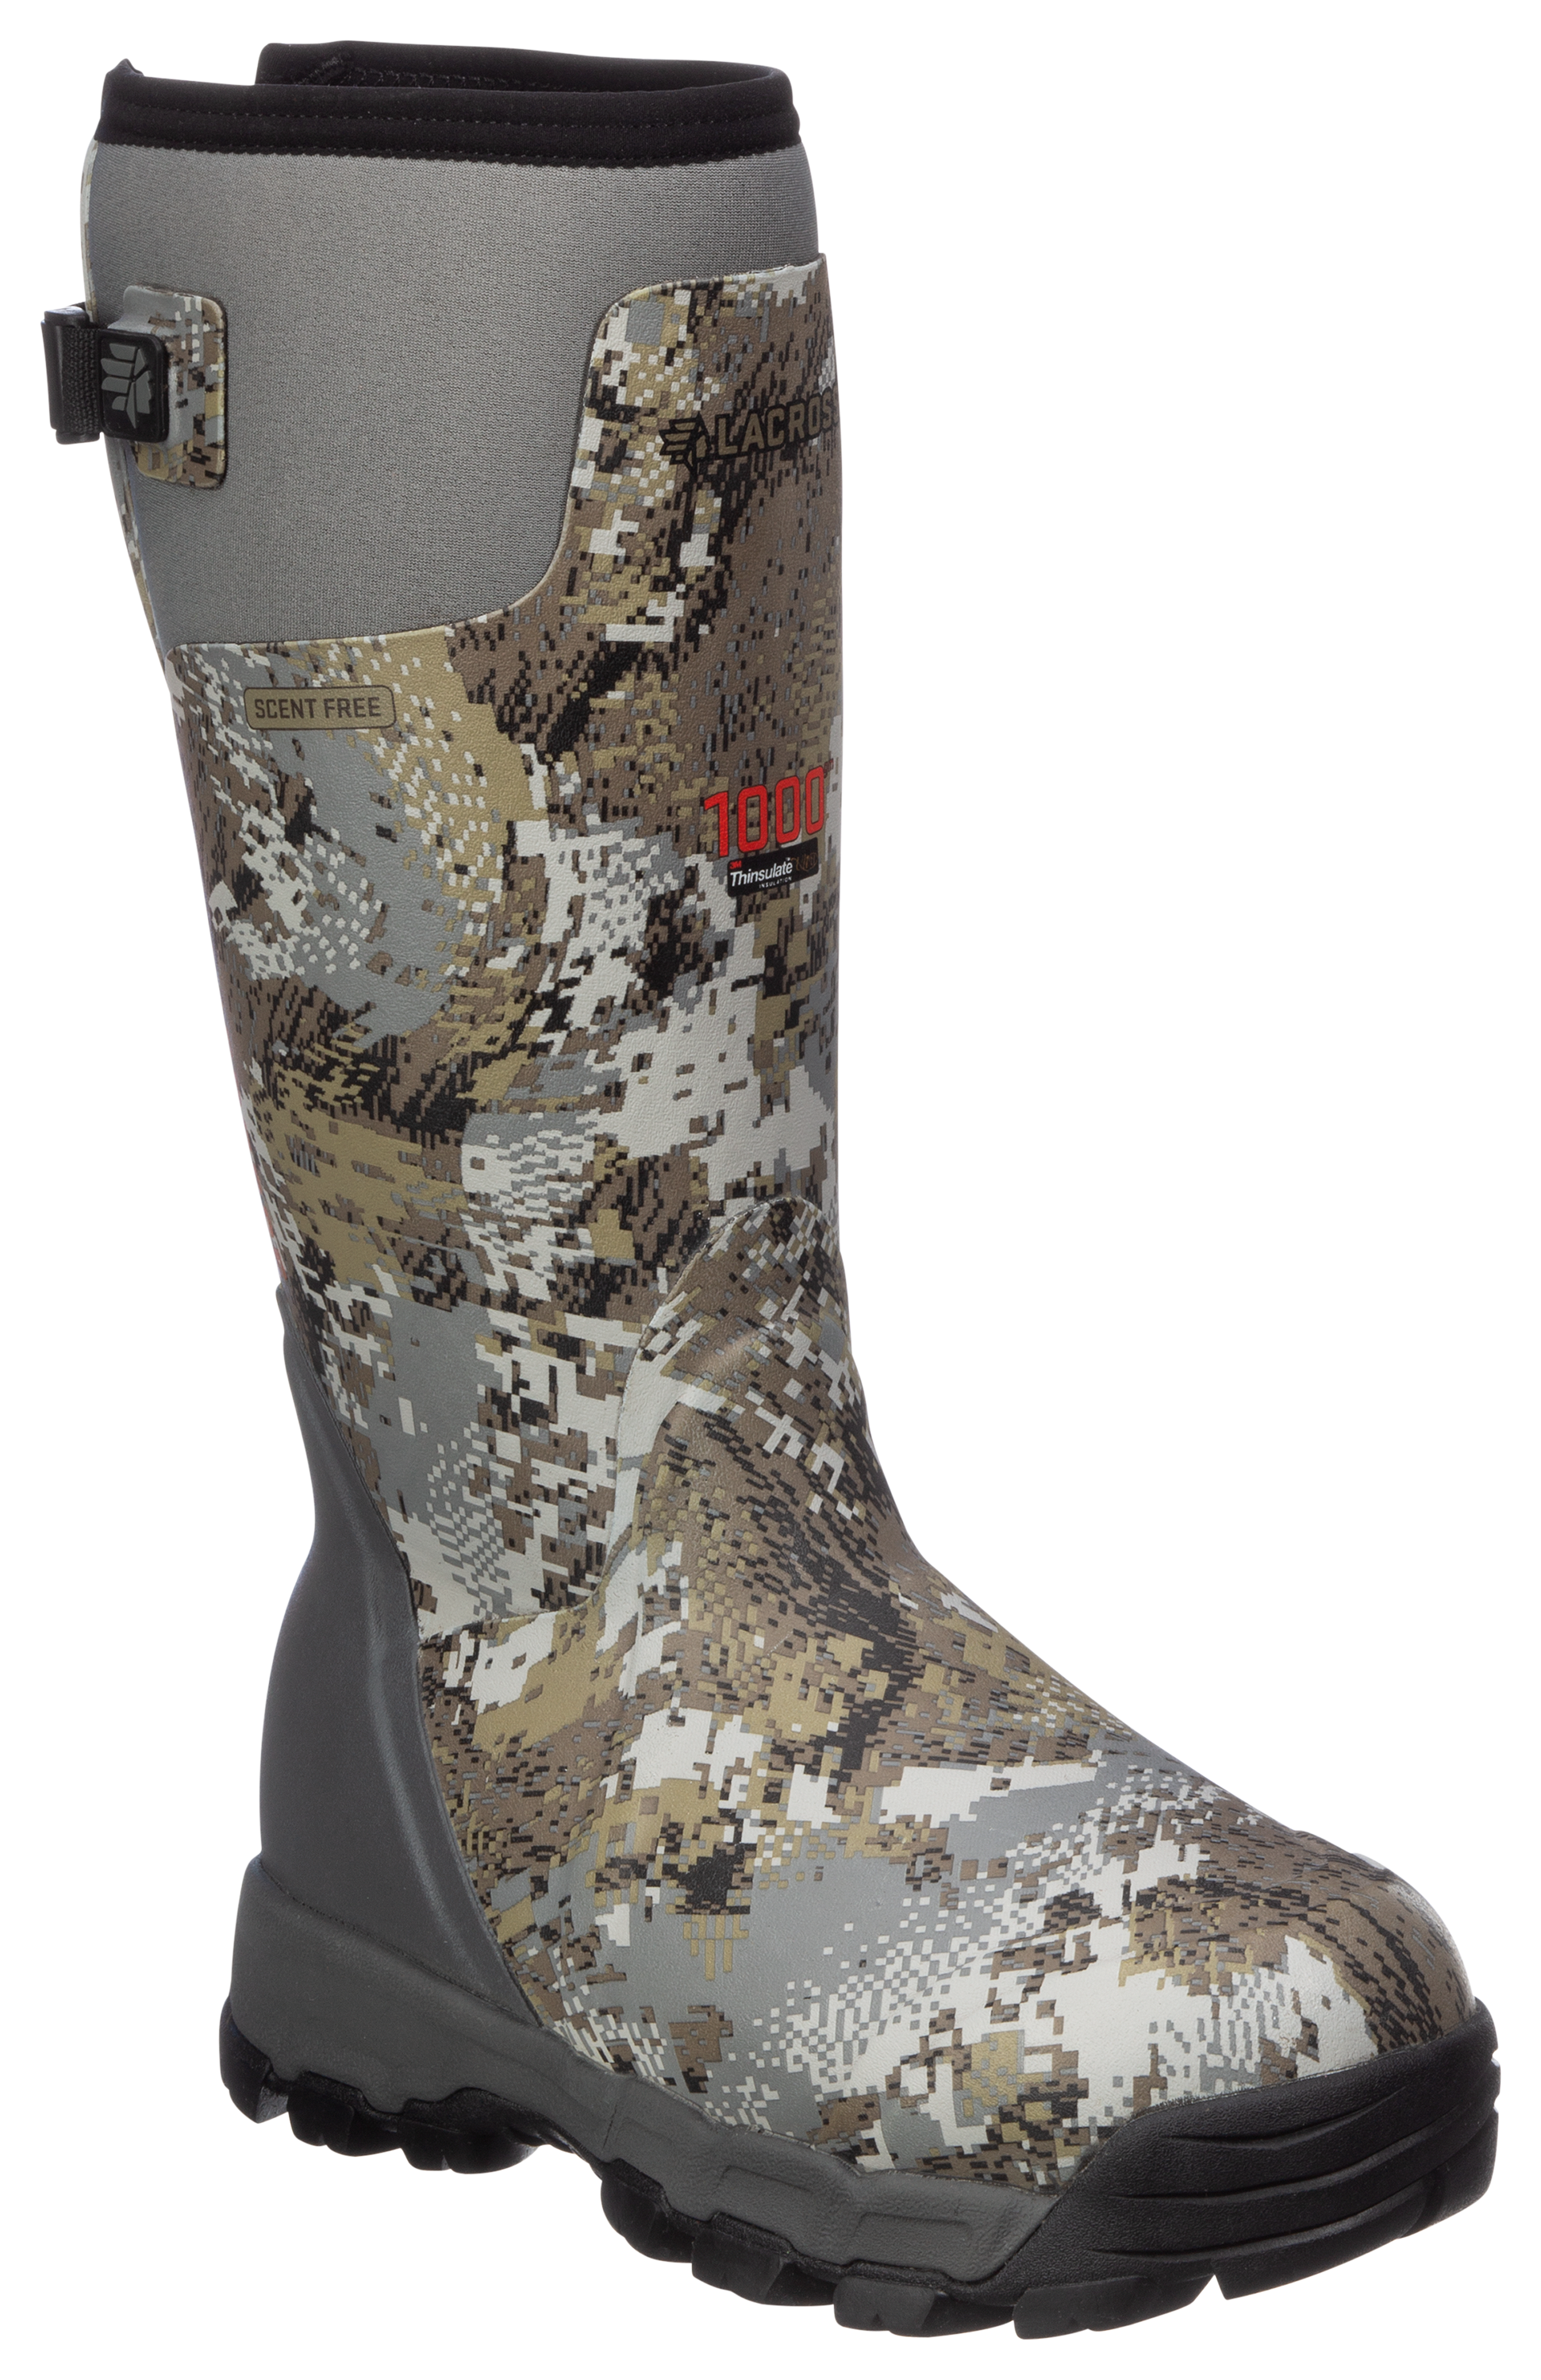 LaCrosse AlphaBurly Pro 1,000 Insulated Hunting Boots for Ladies